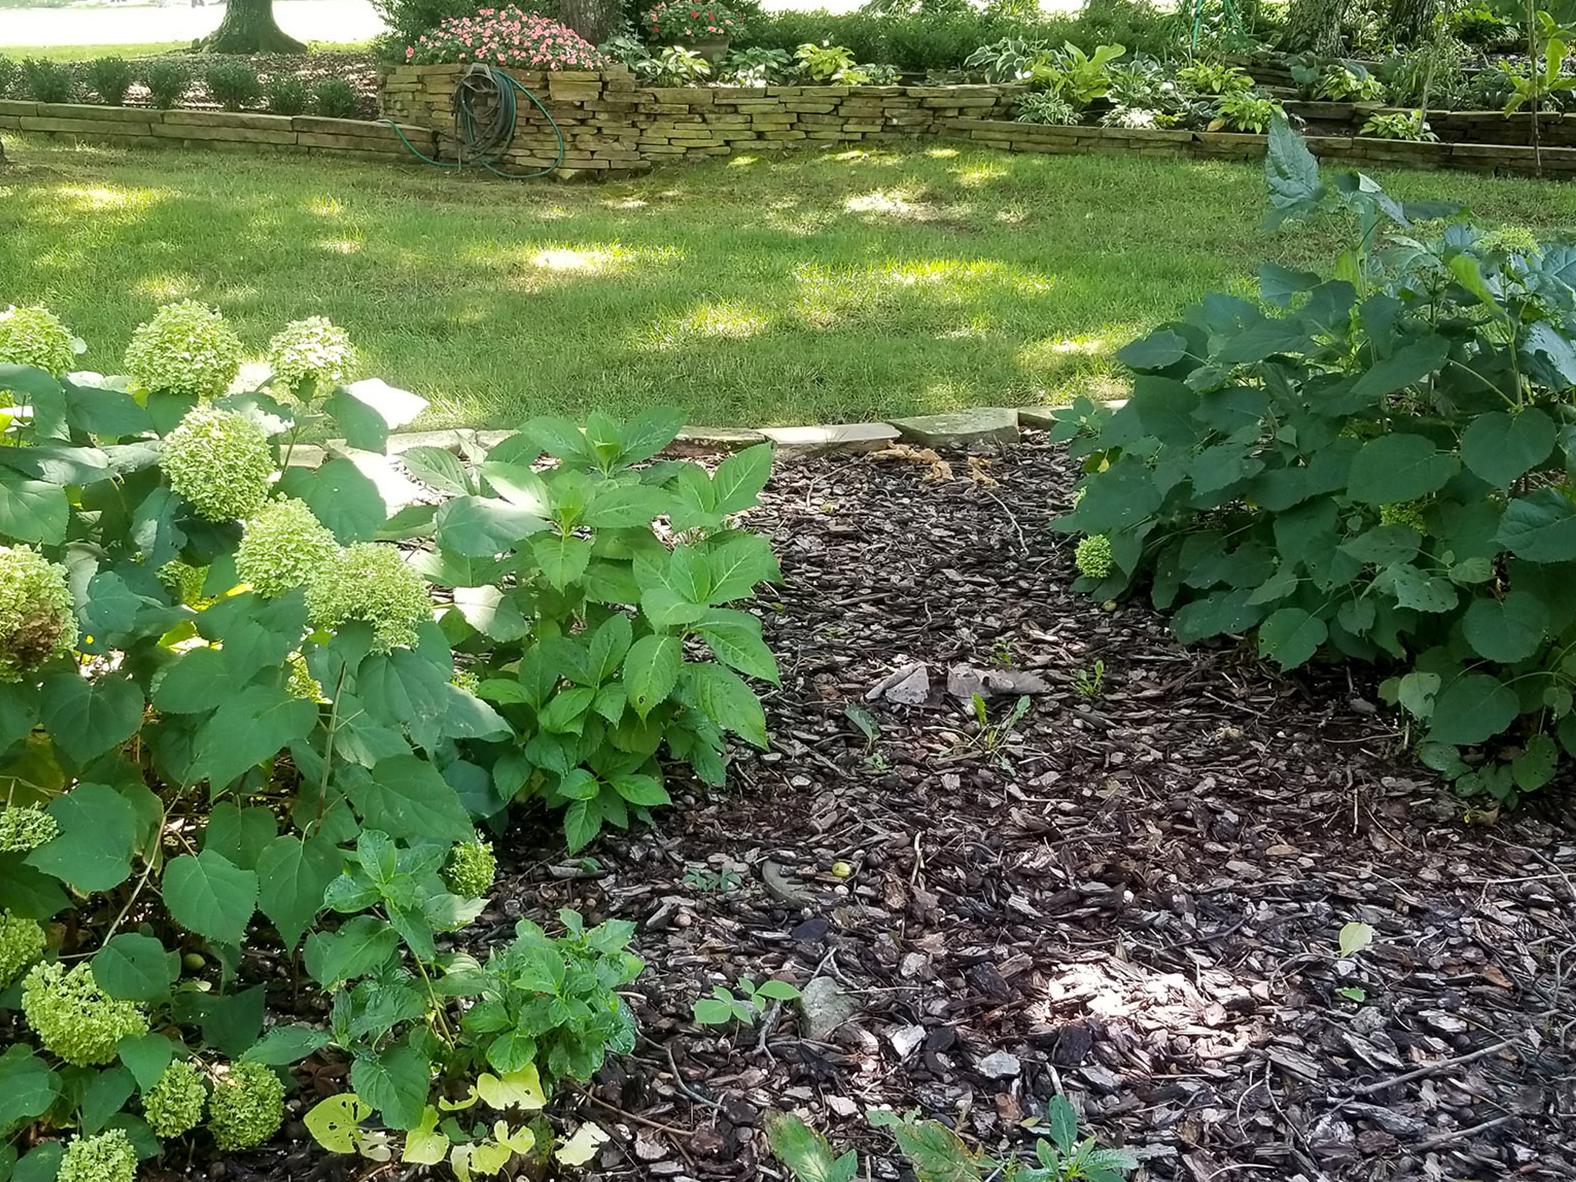 Two hydrangeas are pictured in the foreground of a garden, with one blooming and the smaller one not blooming.